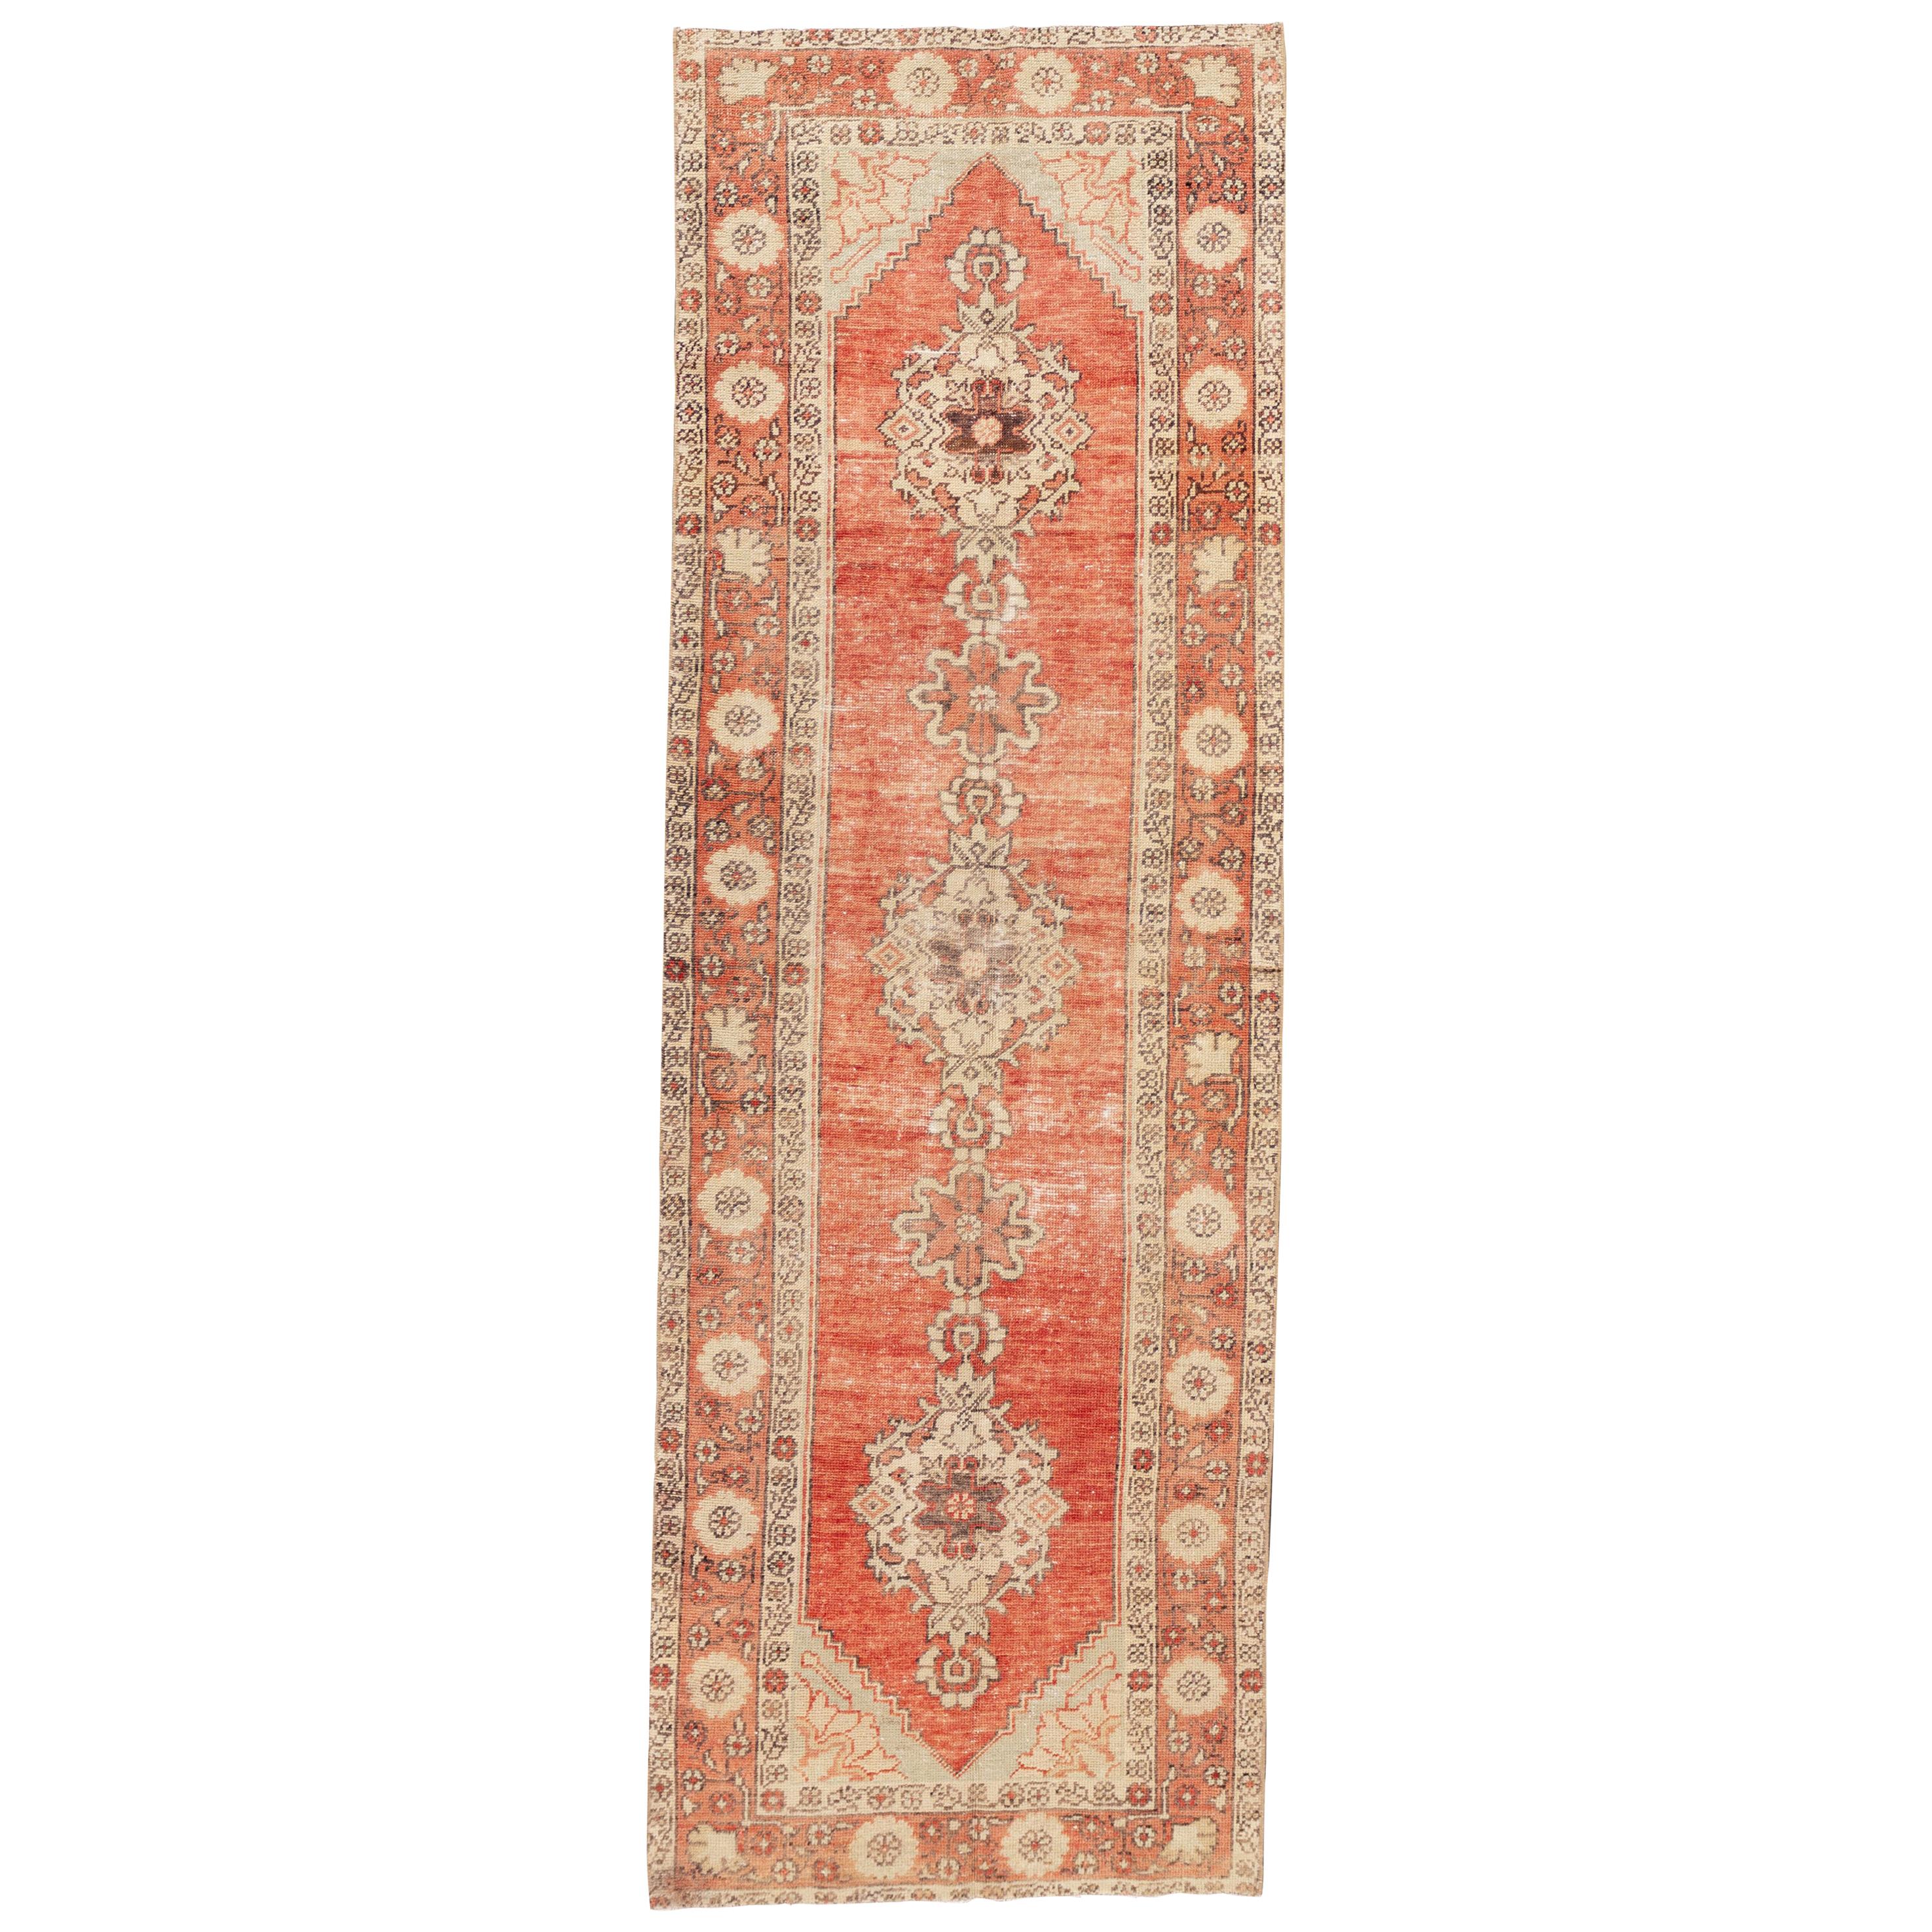 Early 20th Century Antique Anatolian Wool Runner Rug For Sale